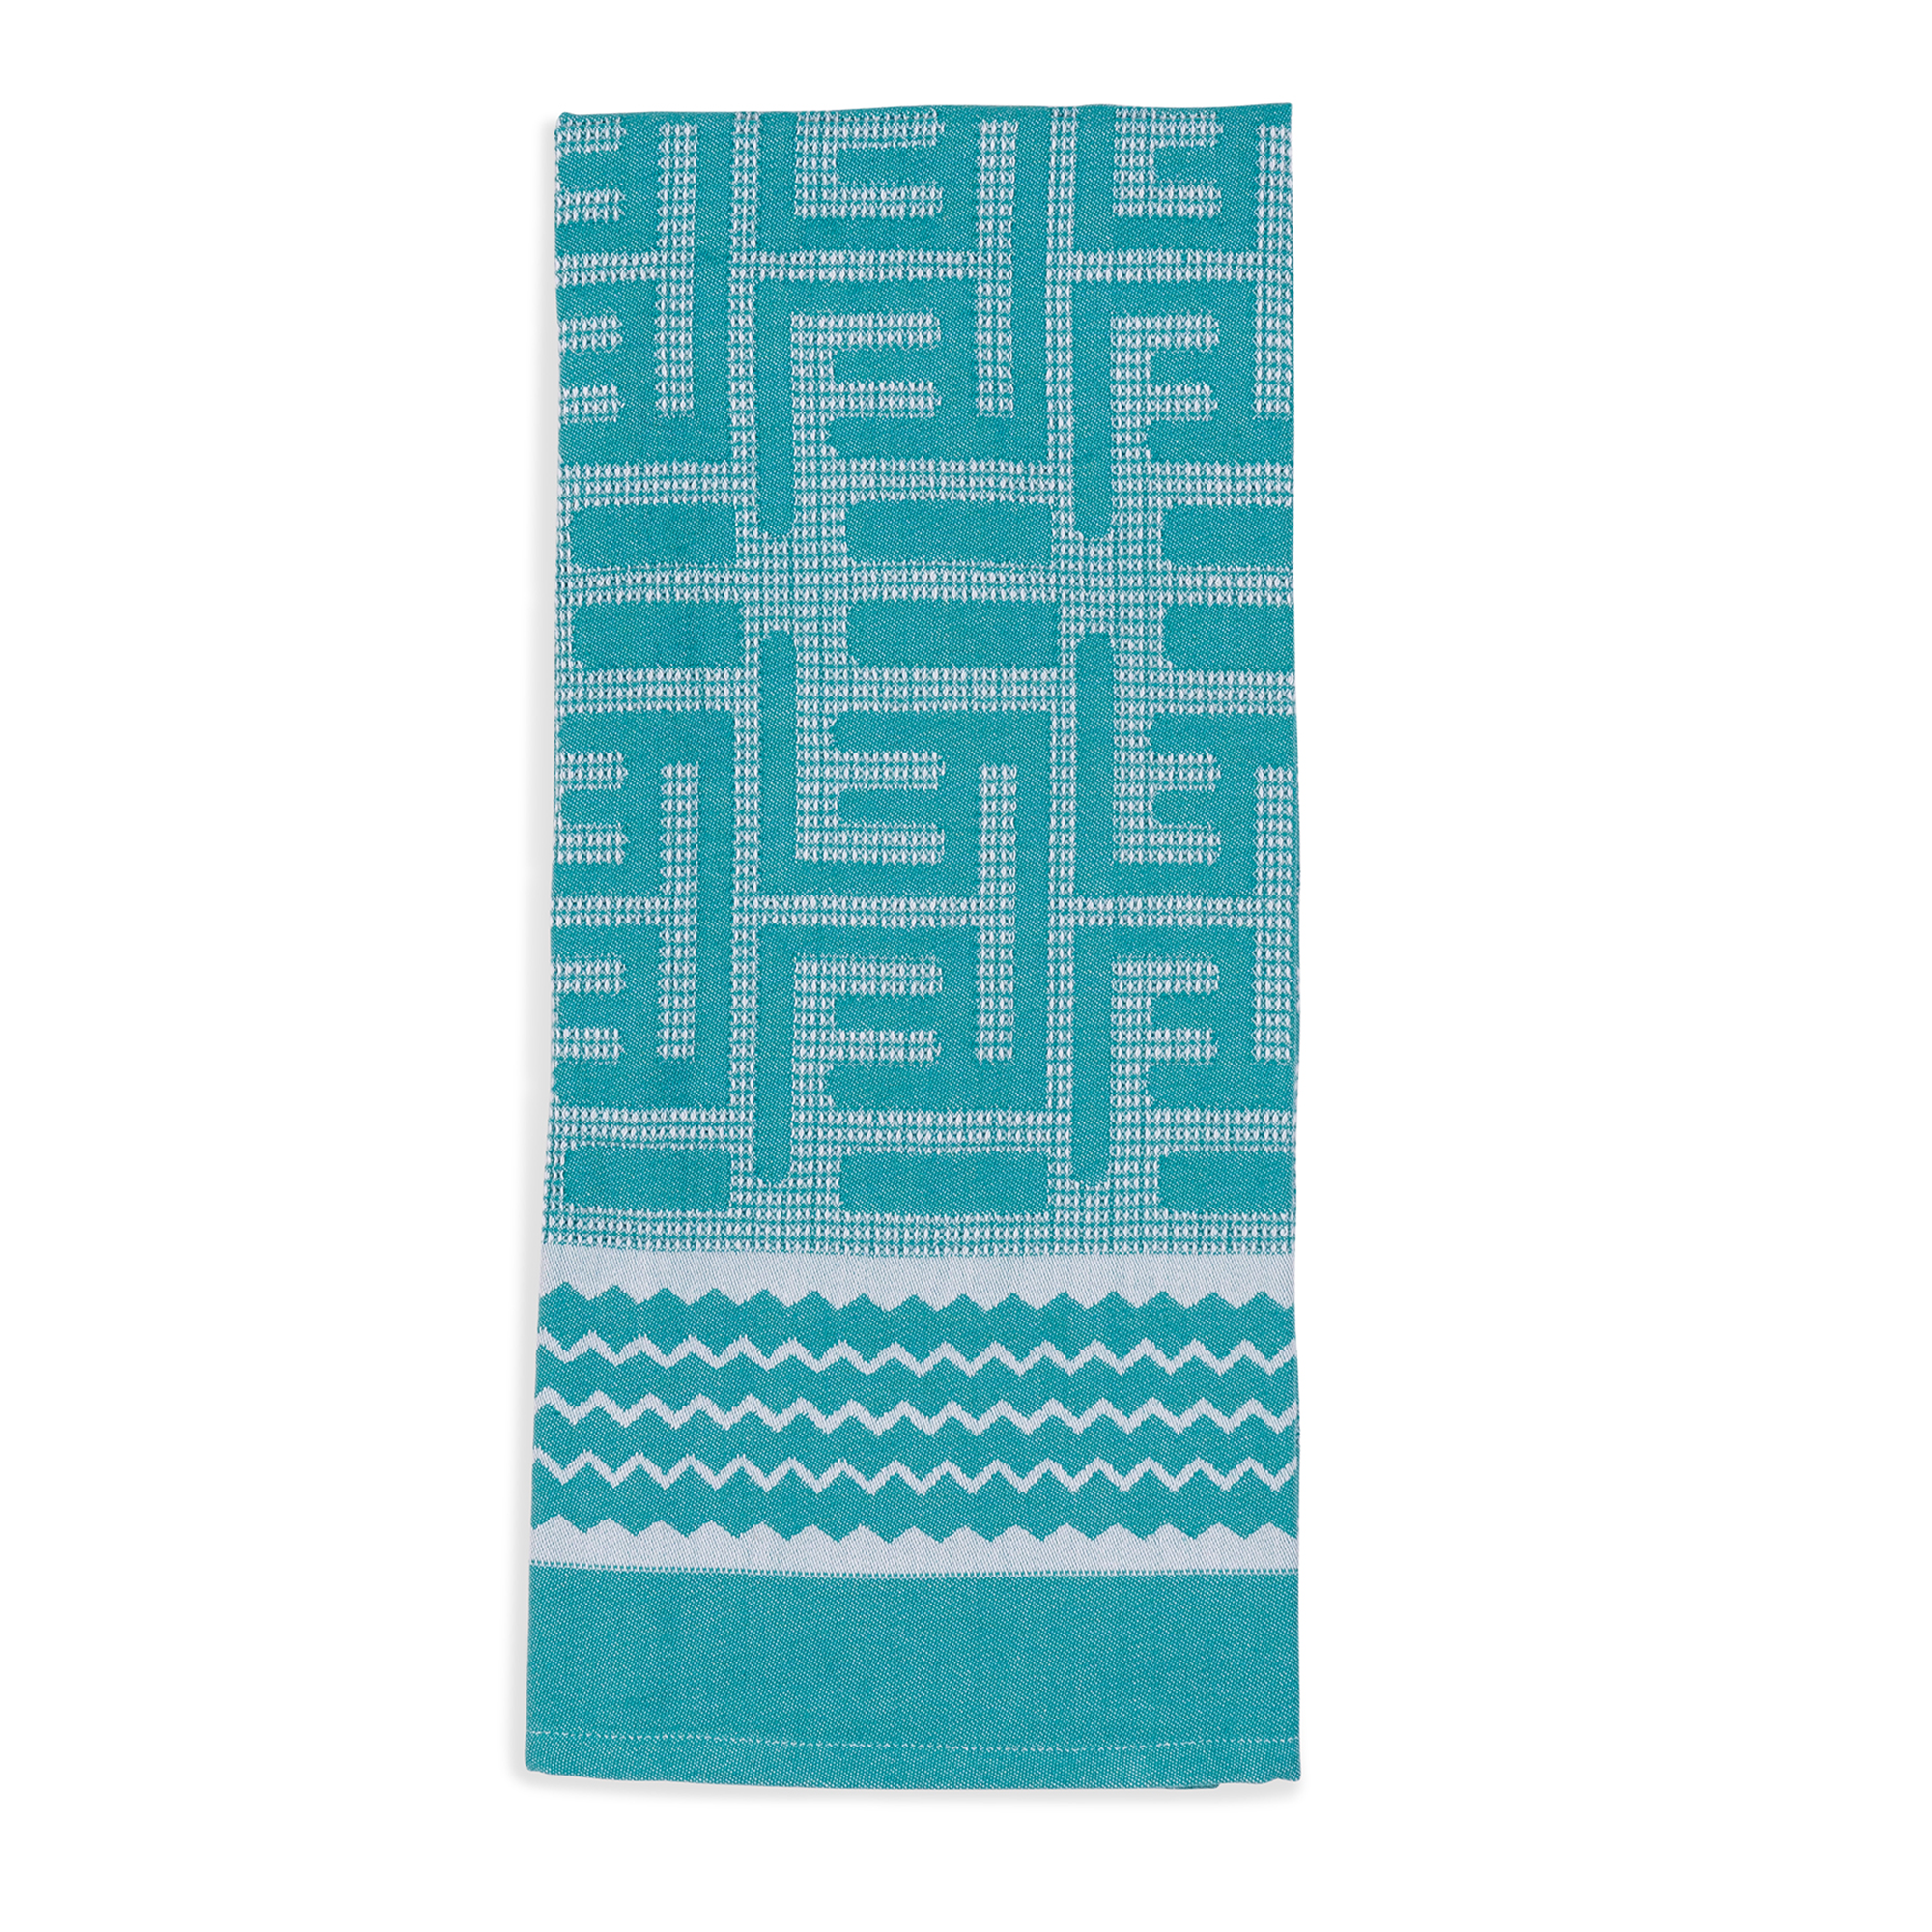 A hand towel in turquoise and white with a geometric pattern, made from 100% cotton fabric, perfect for everyday use at home or on the go.